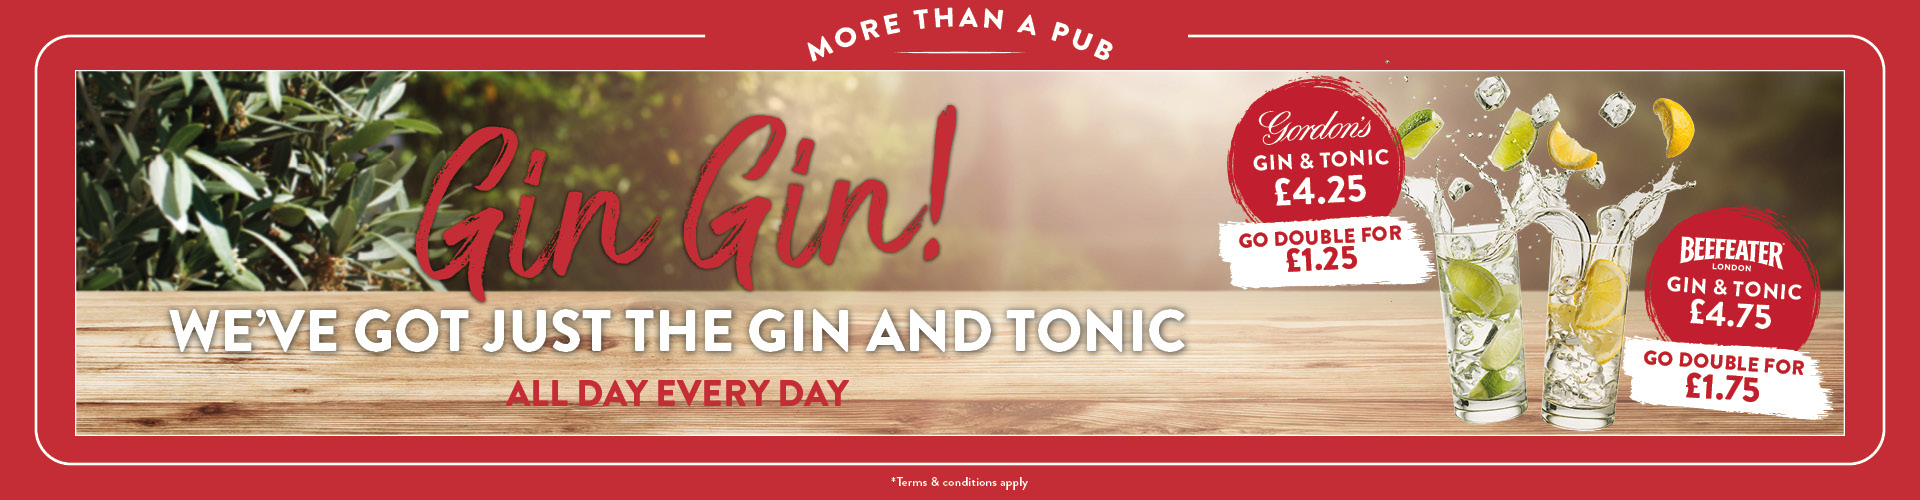 Latest gin drink offers at your local Craft Union Pub